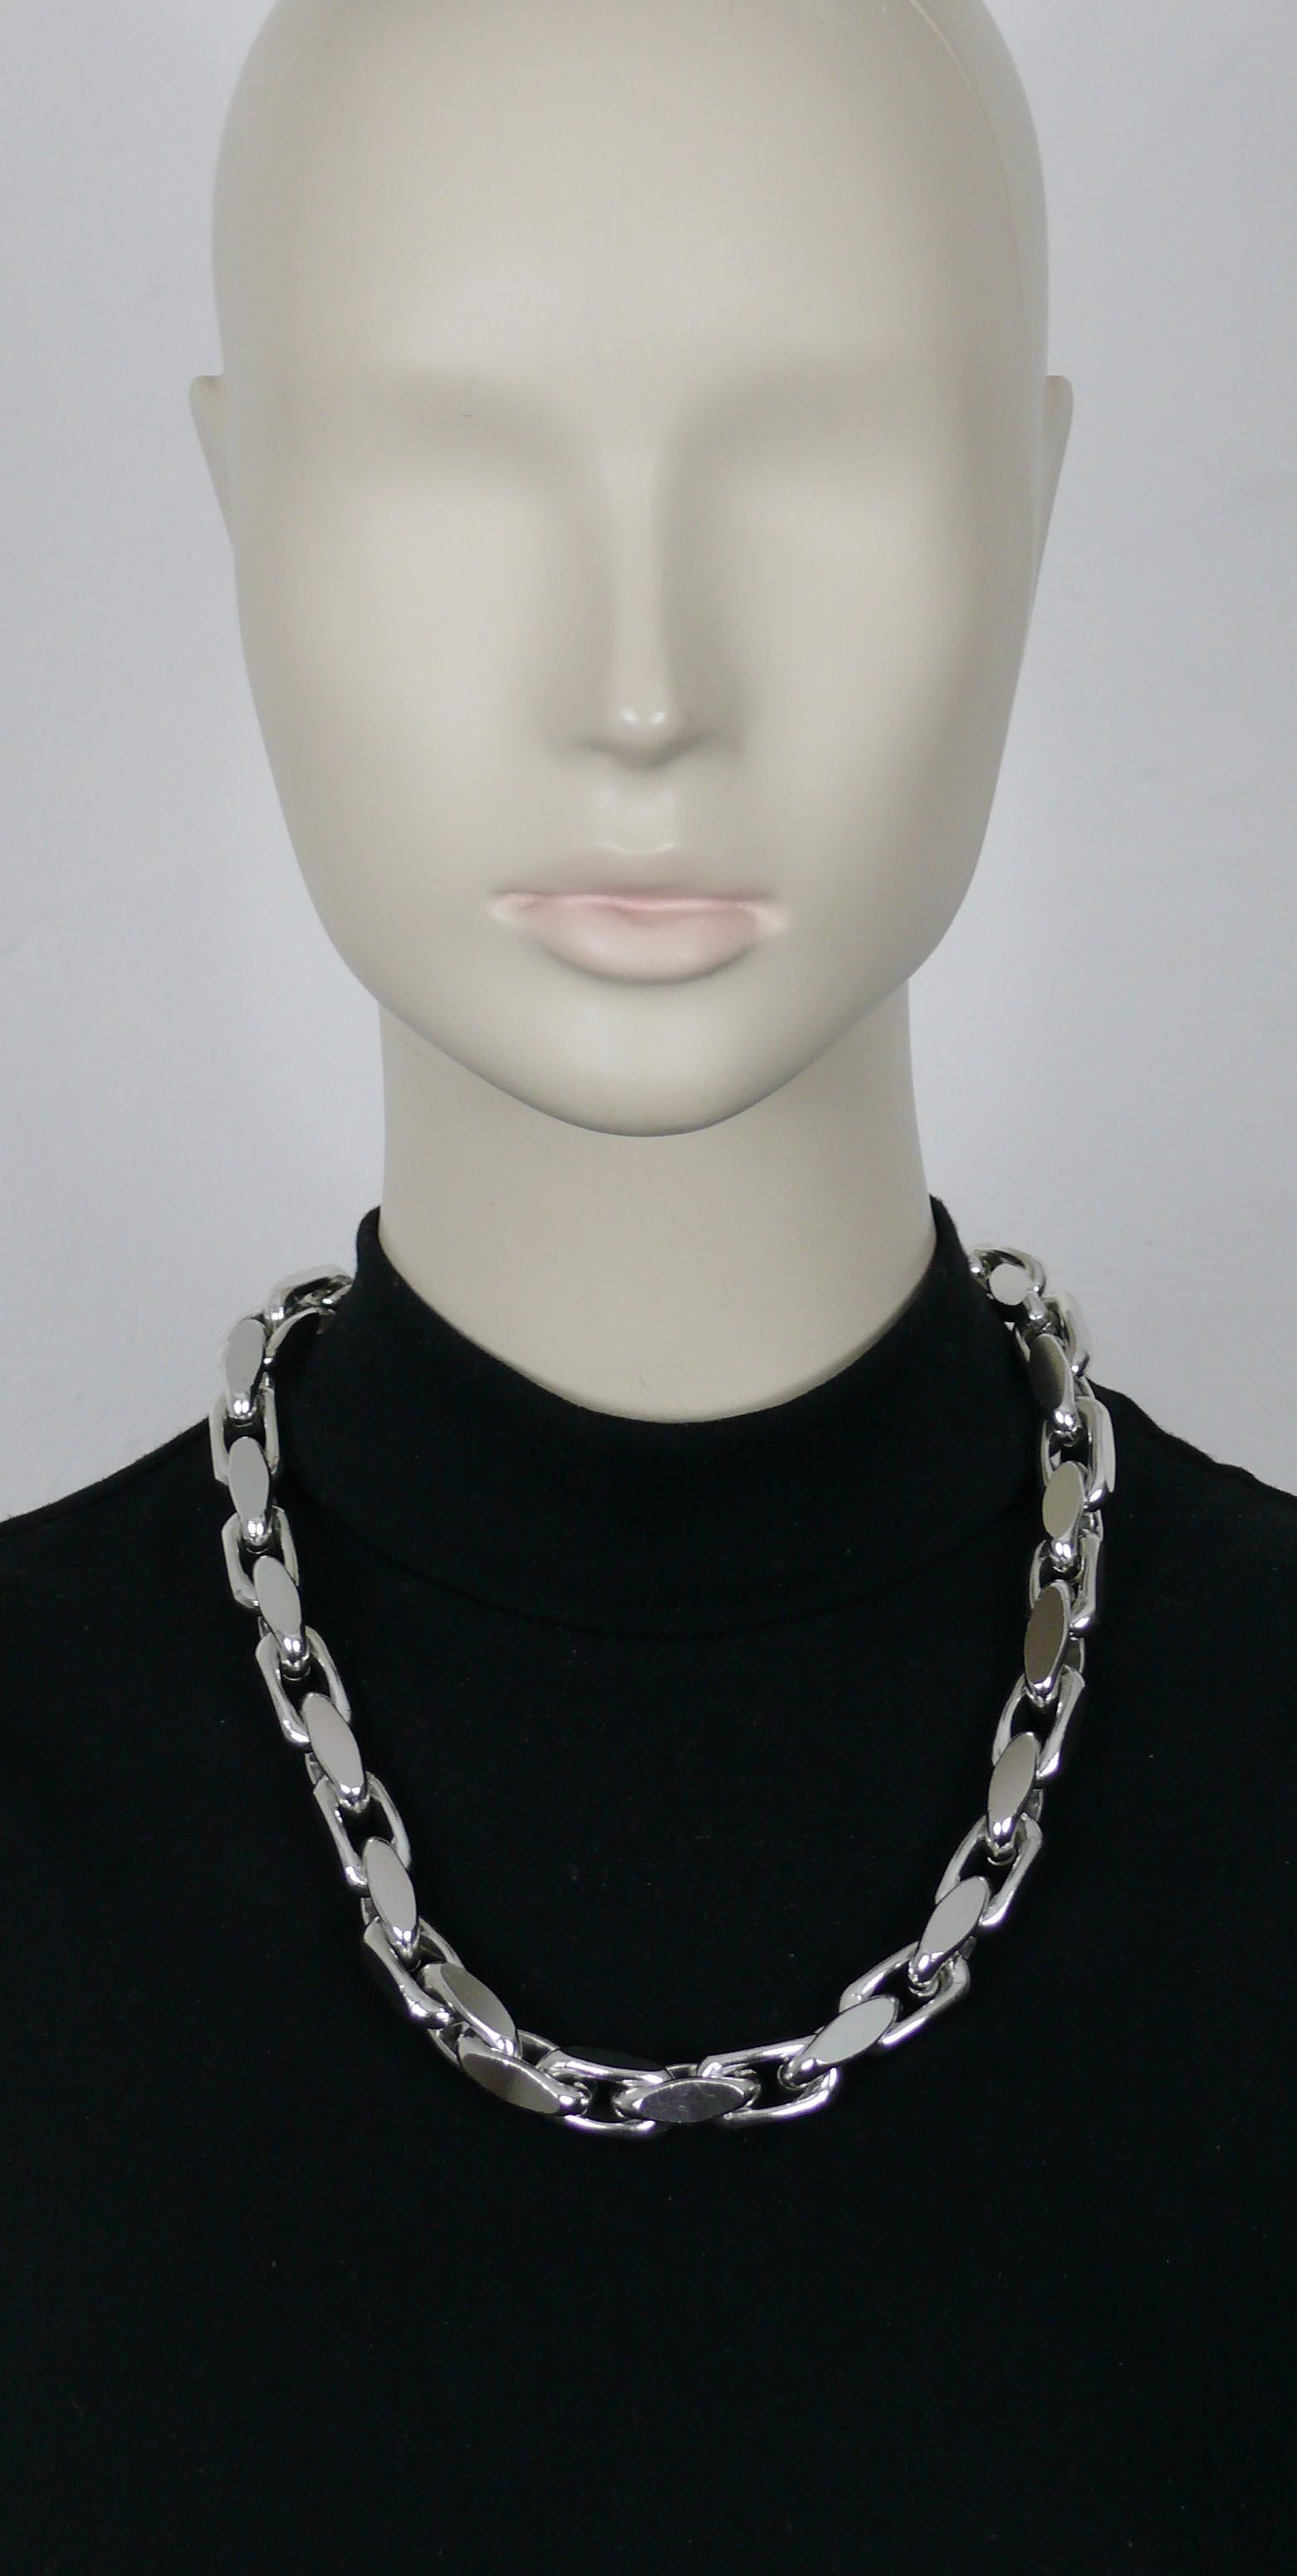 CHRISTIAN DIOR vintage 1973 silver tone lightweight chain link necklace.

Secure clasp closure.

Embossed 1973 CHR. DIOR Germany.

Indicative measurements : length approx. 58 cm (22.83 inches) / width approx. 1.2 cm (0.47 inch).

Material : Silver